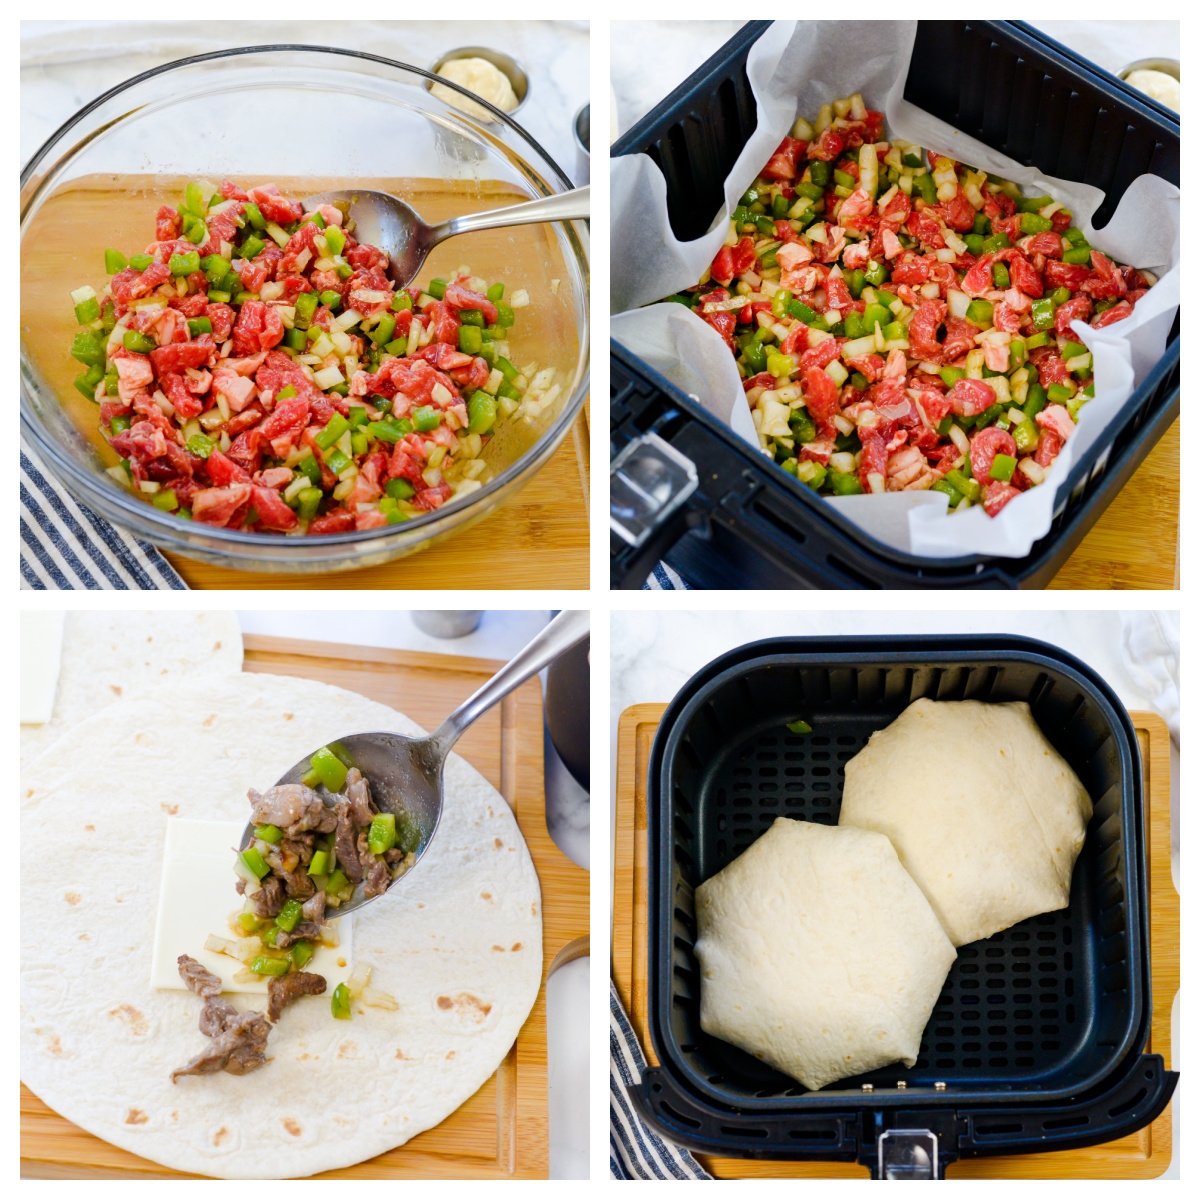 Collage showing how to make Philly crunchwrap.